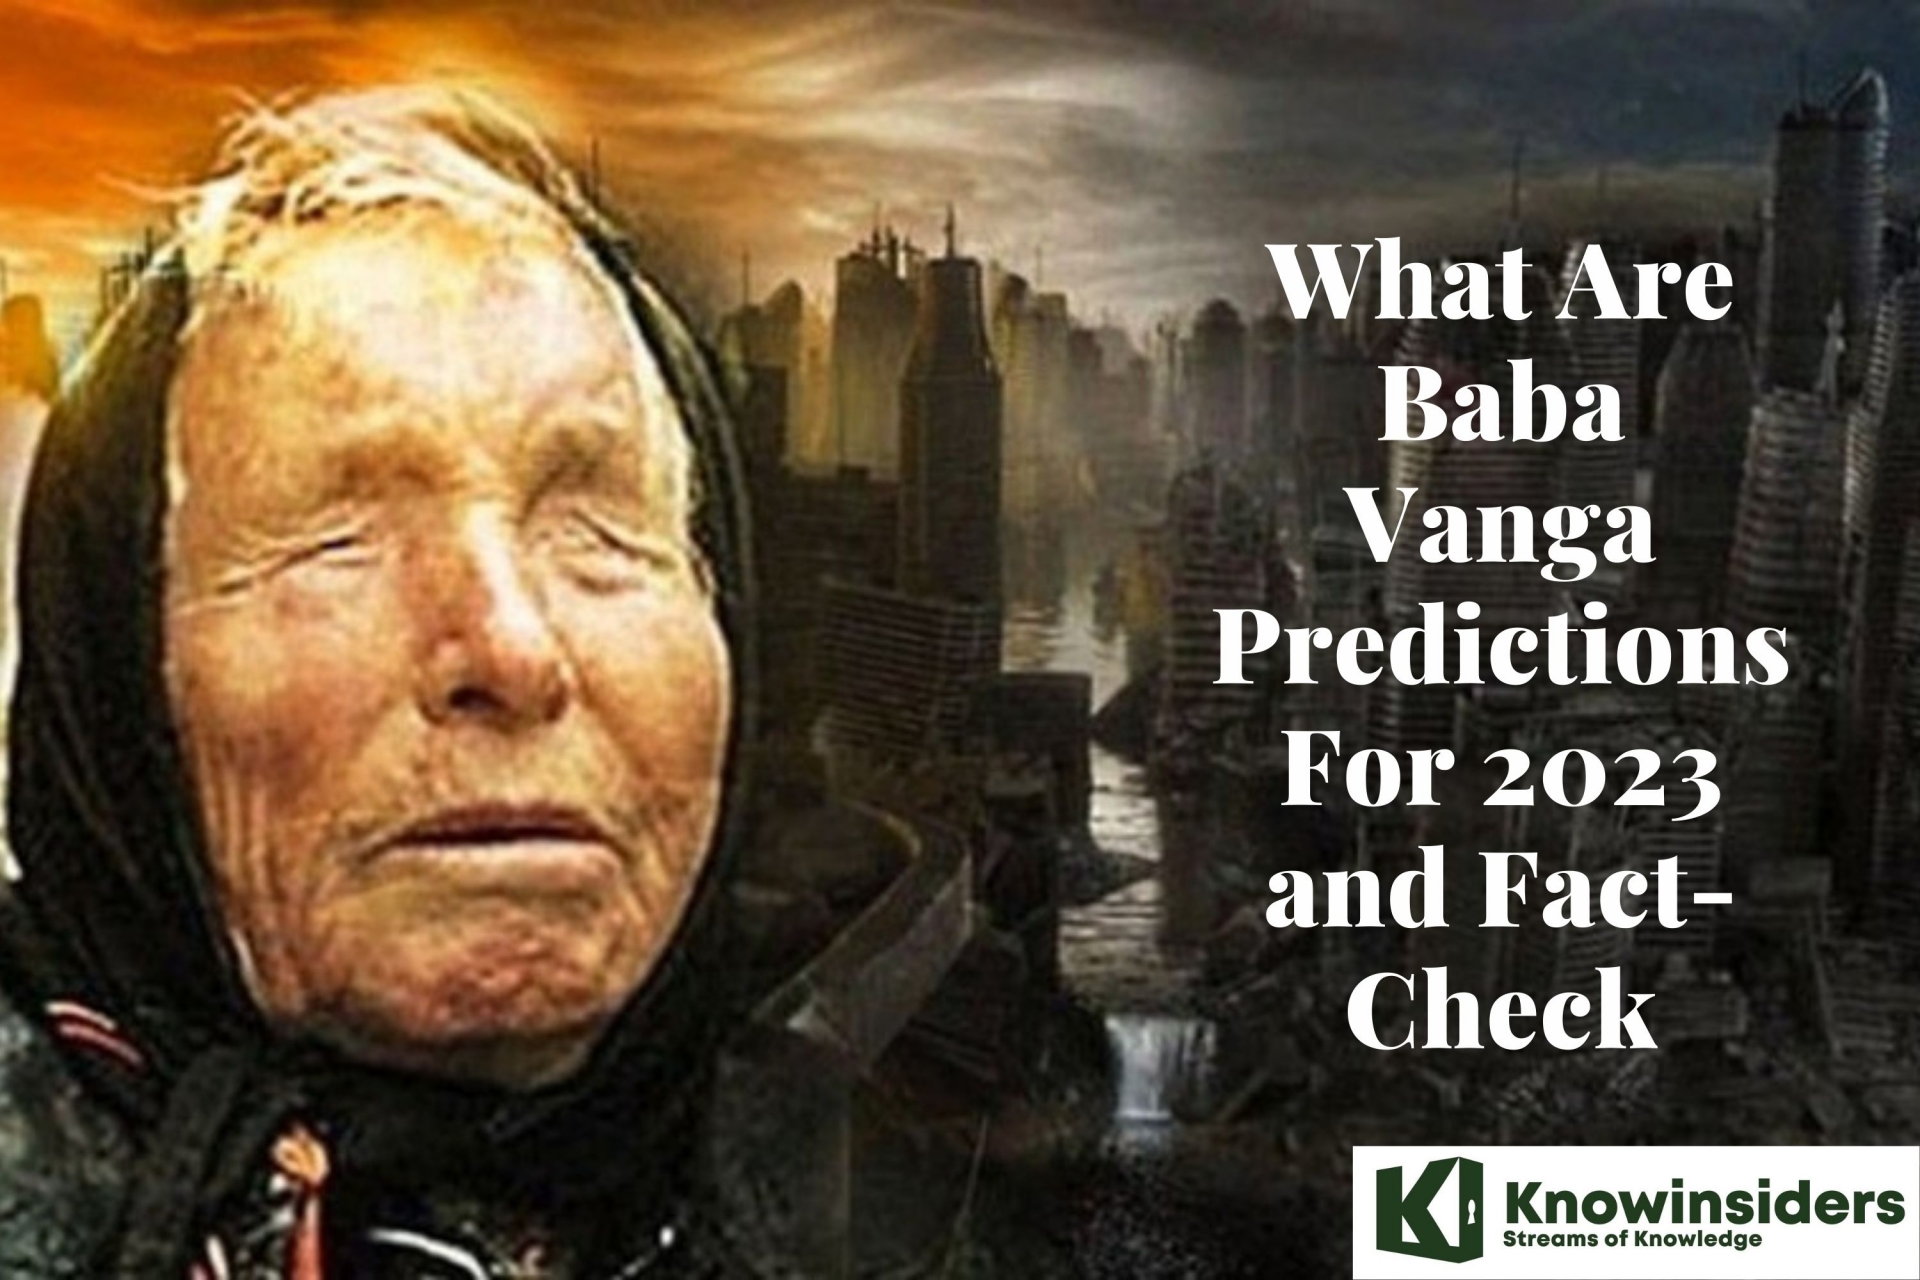 What Are Baba Vanga Predictions For 2023 and Fact Check